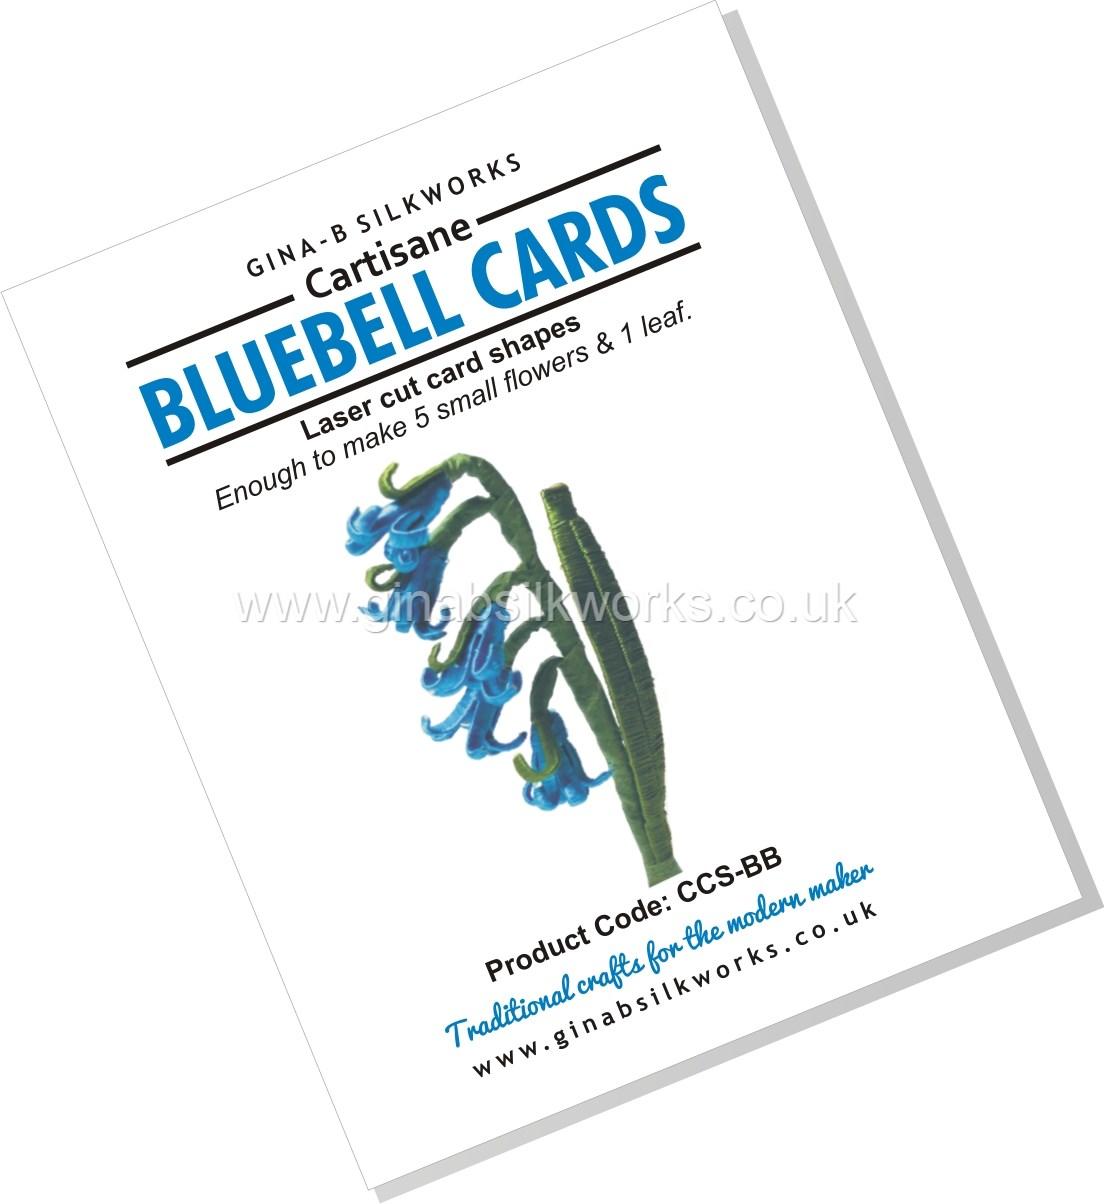 Bluebell Cards